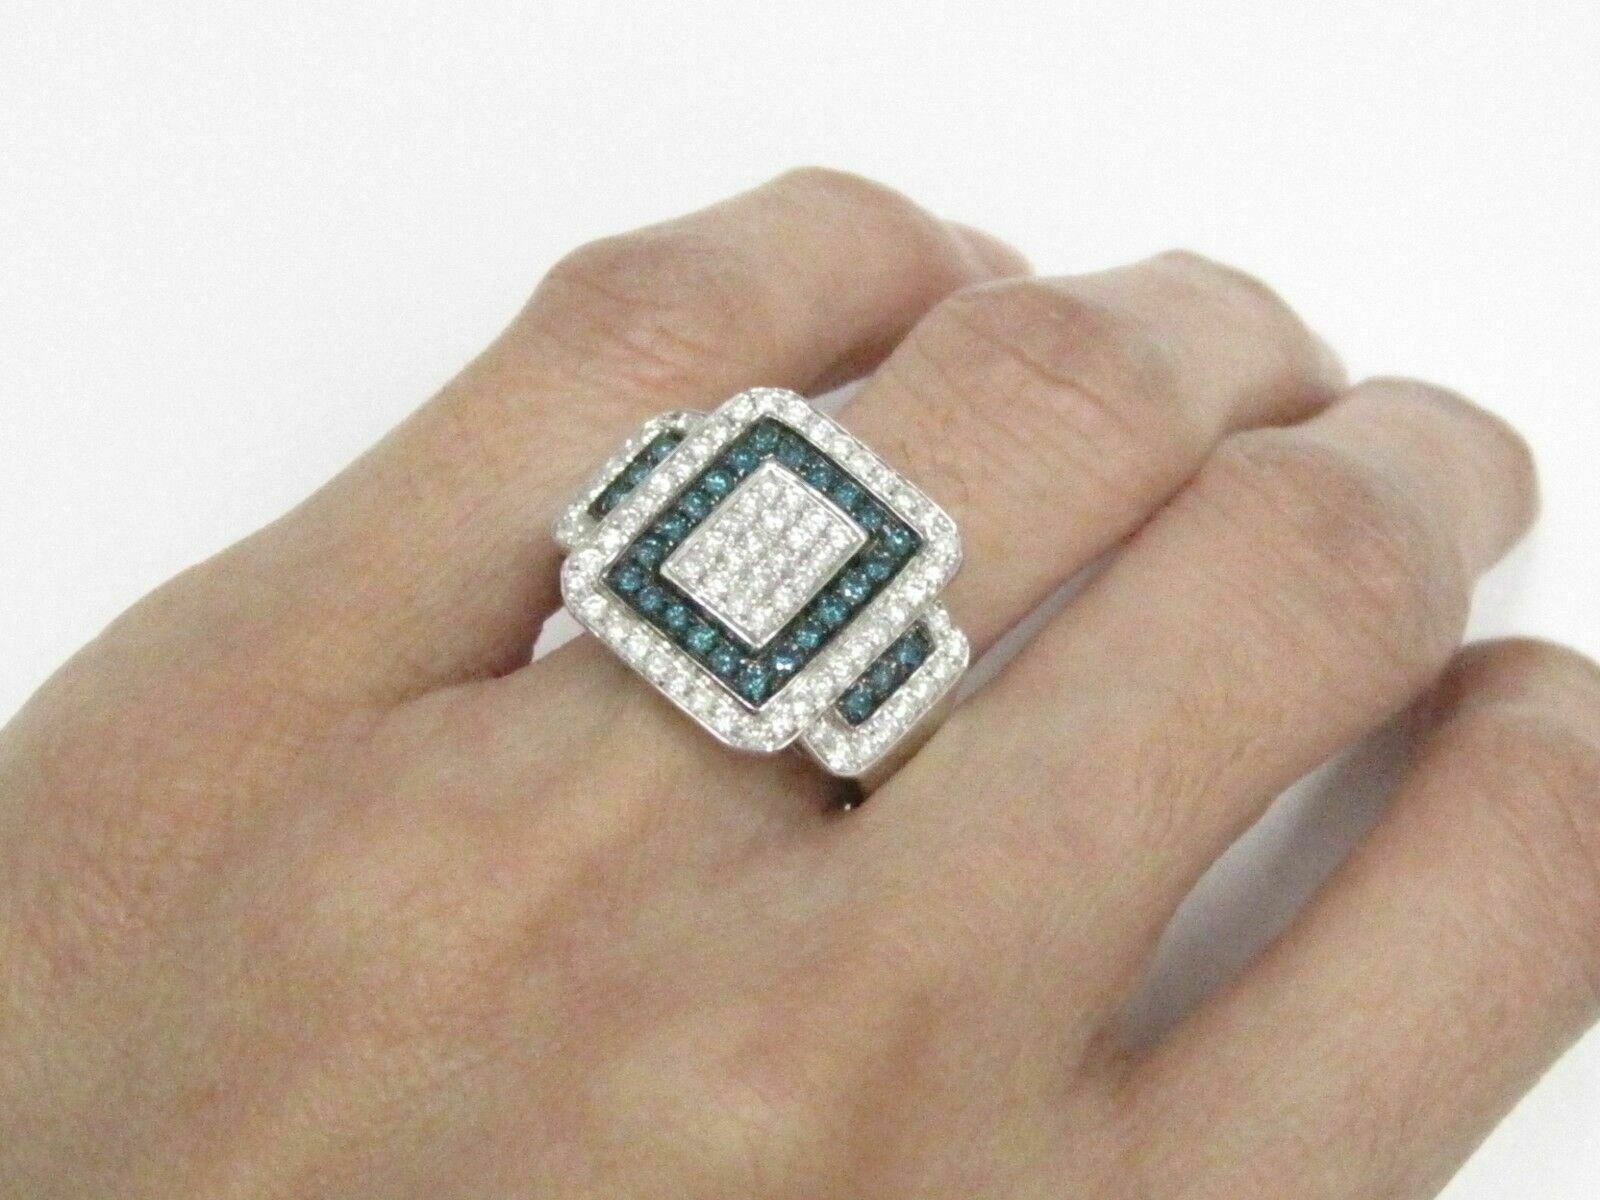 1.18 TCW Natural Round Blue & White Diamonds Square Cocktail Ring Size 7 14kt WG